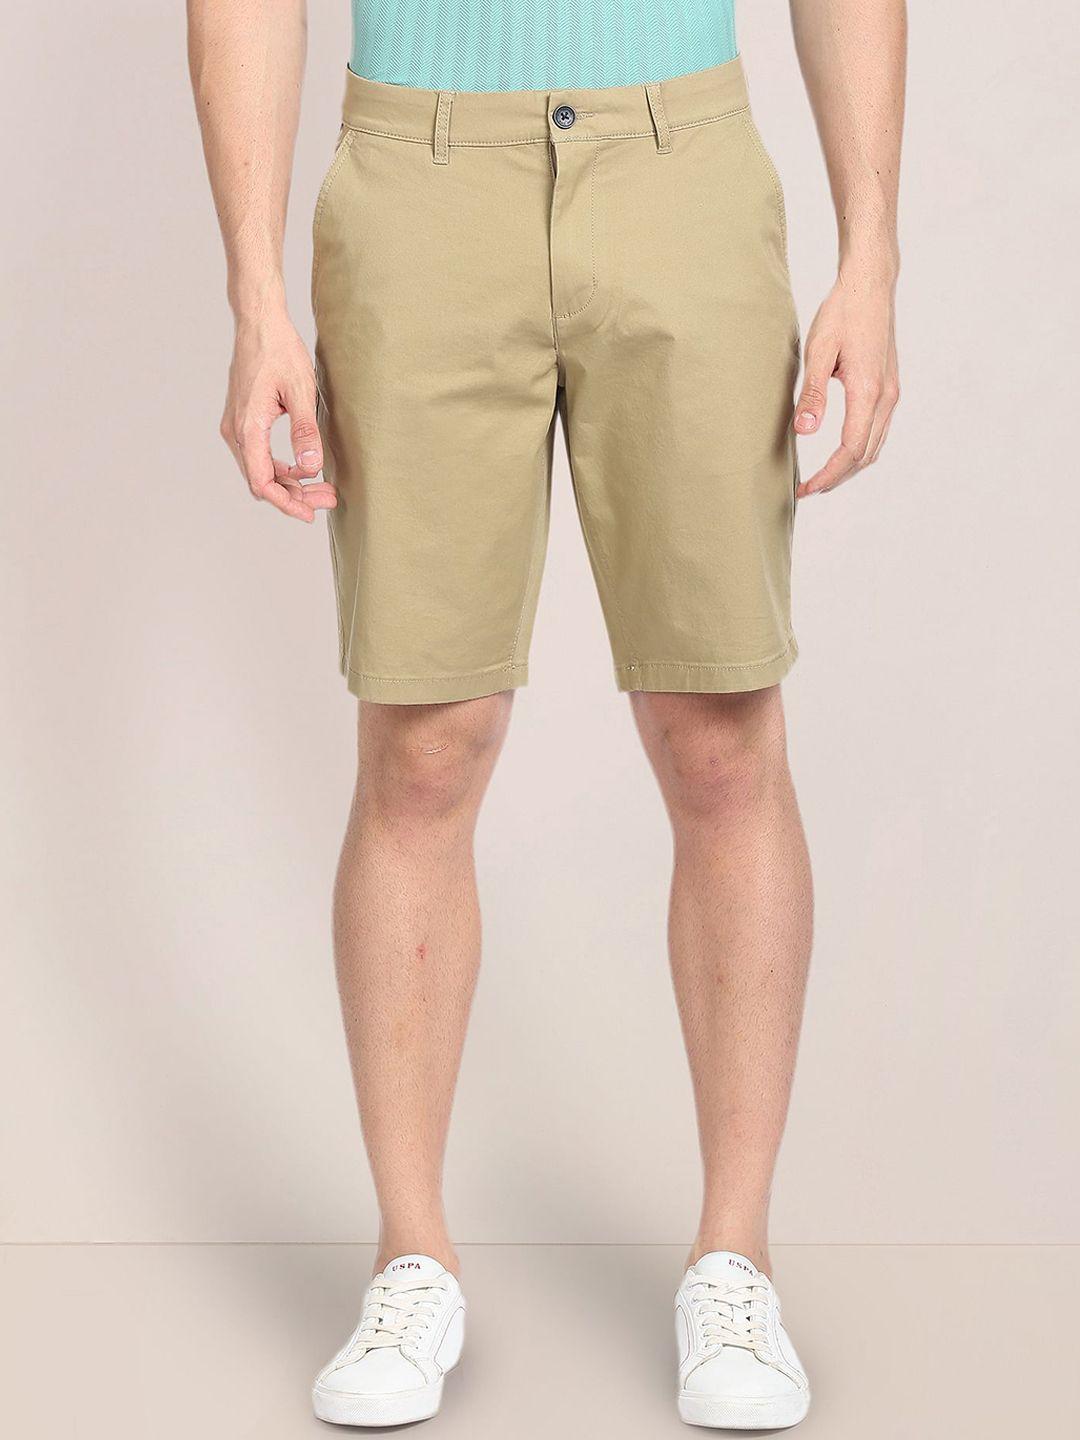 u.s. polo assn. men mid-rise slim fit chino shorts